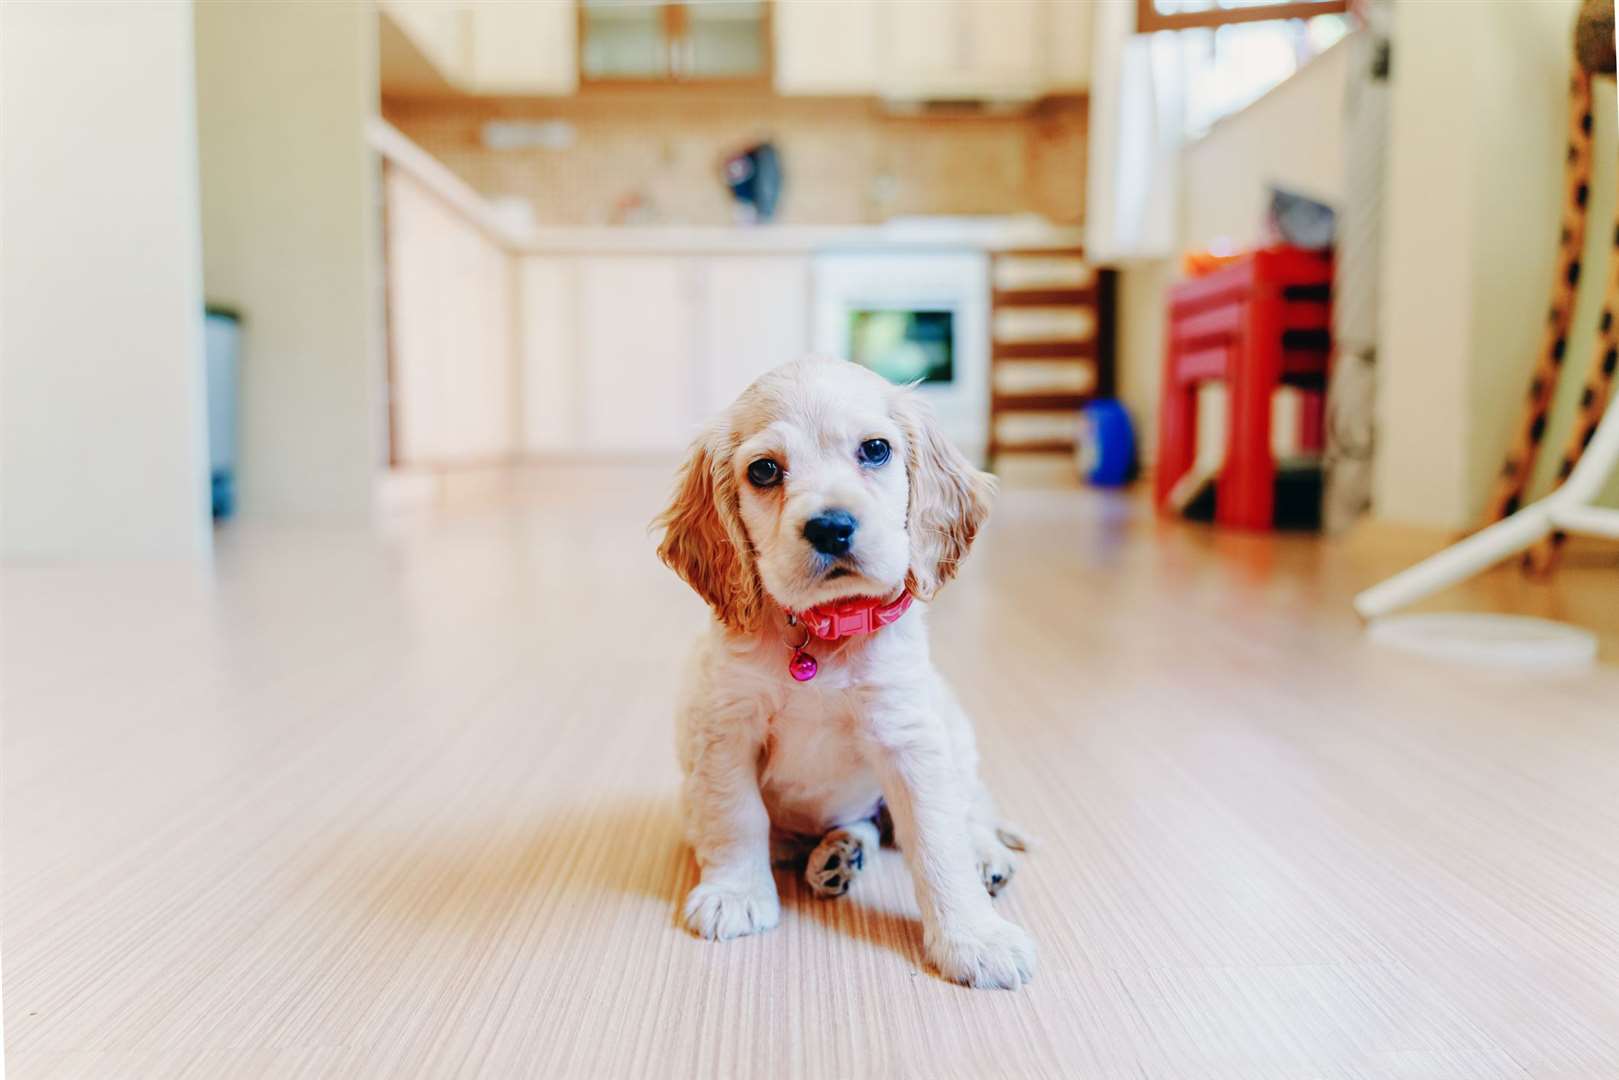 Coming in at fourth on the list is the cocker spaniel, which saw an average of 192,000 searches each month. Stock Image